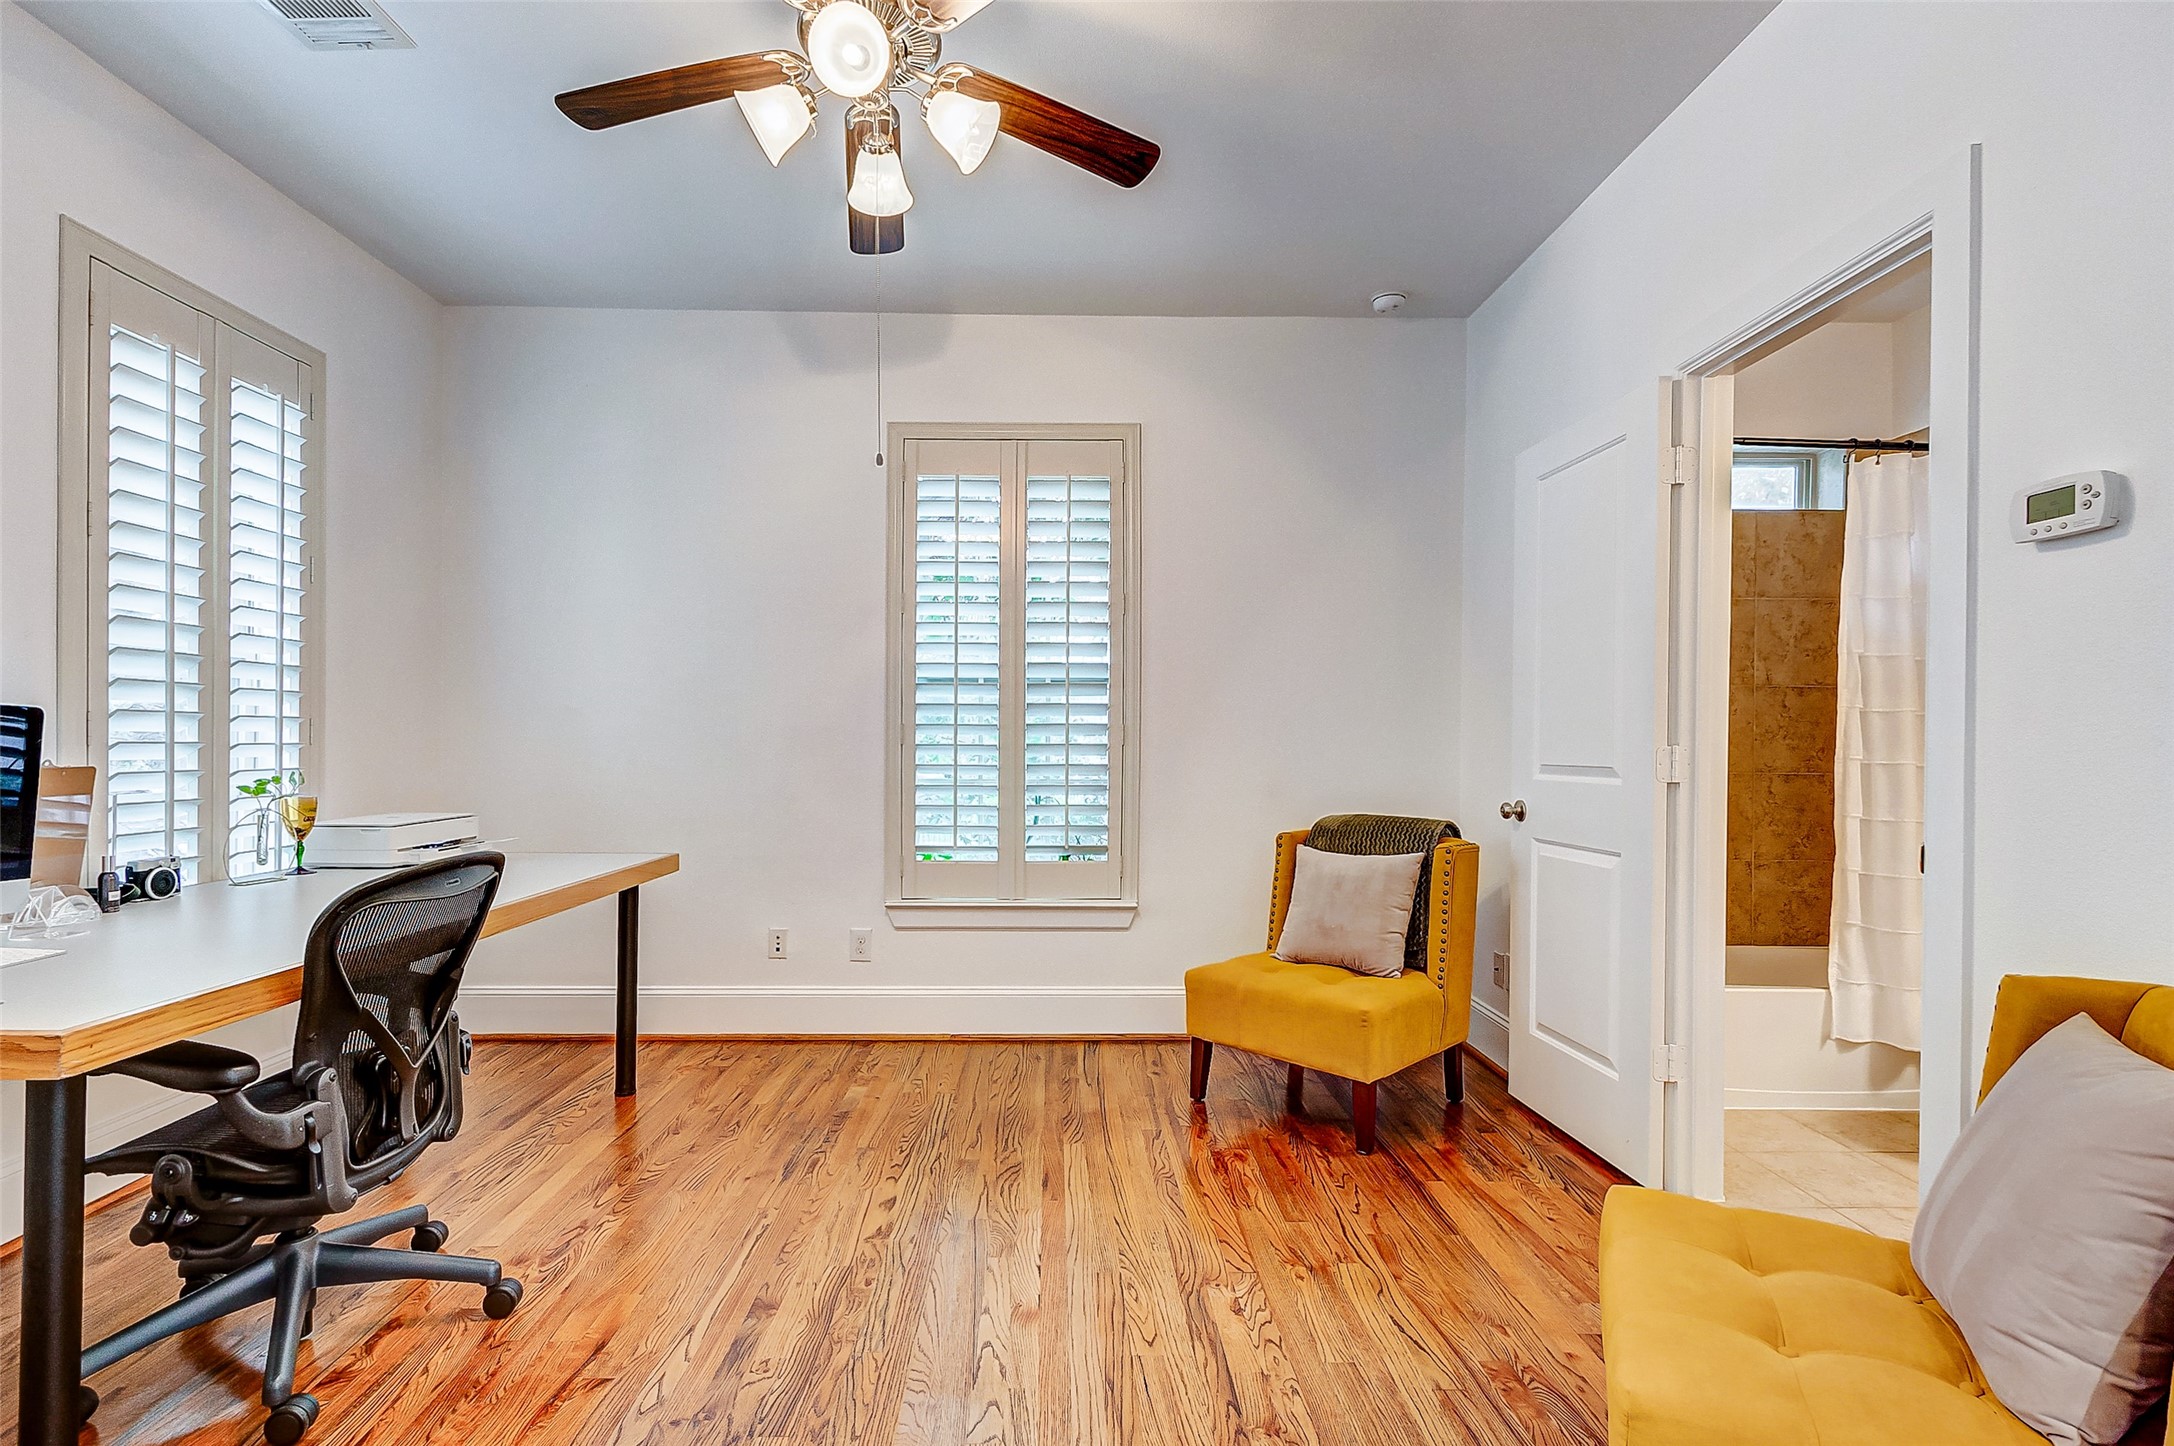 This room could be used as an office area, hobby room, or is perfect for a private guest room.